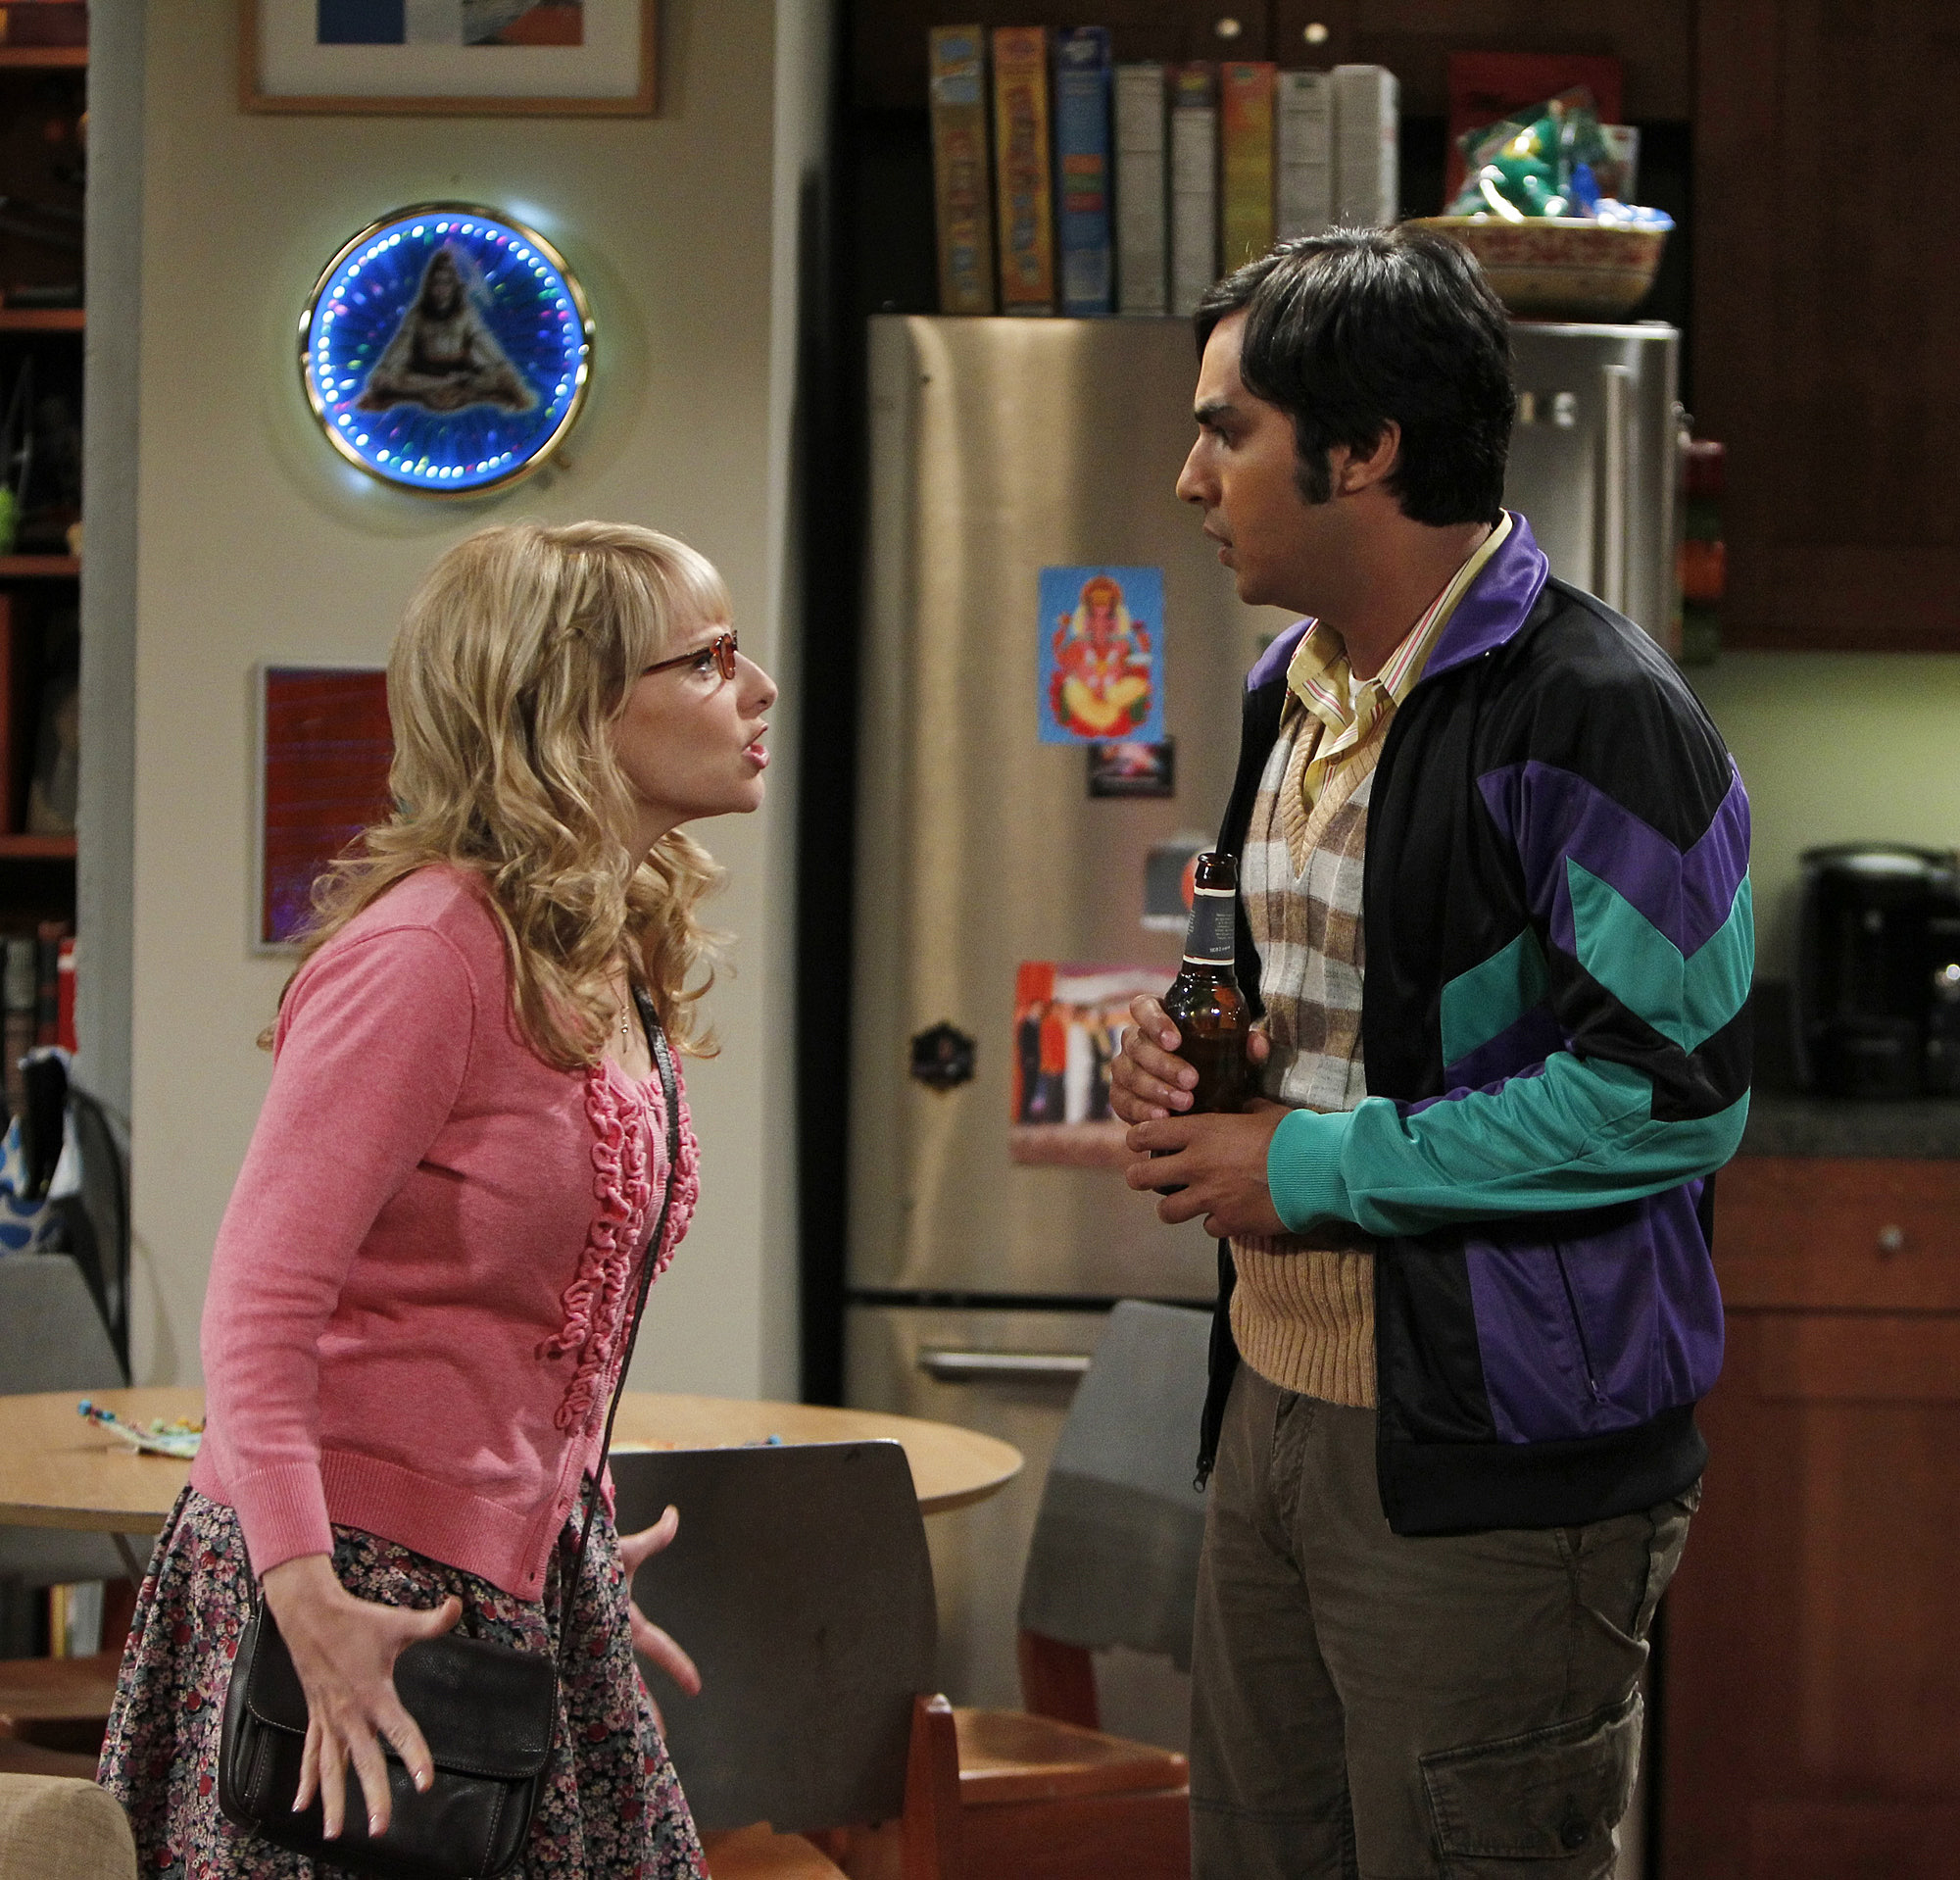 Bernadette and Raj have a verbal altercation in "The Skank Reflex Analysis", an episode of 'The Big Bang Theory'